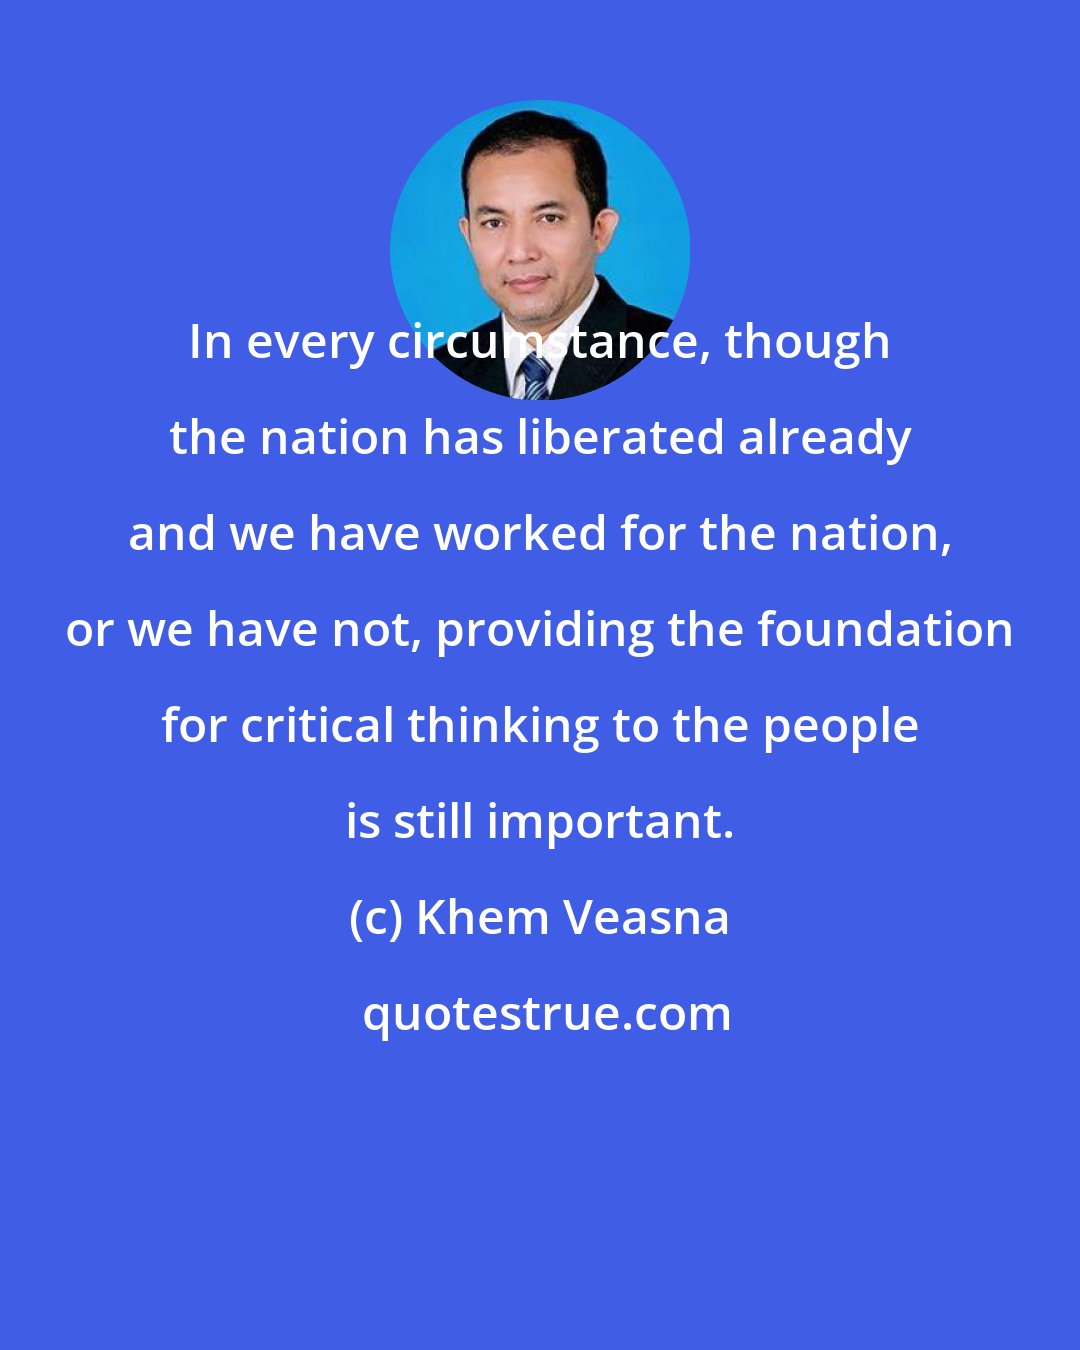 Khem Veasna: In every circumstance, though the nation has liberated already and we have worked for the nation, or we have not, providing the foundation for critical thinking to the people is still important.